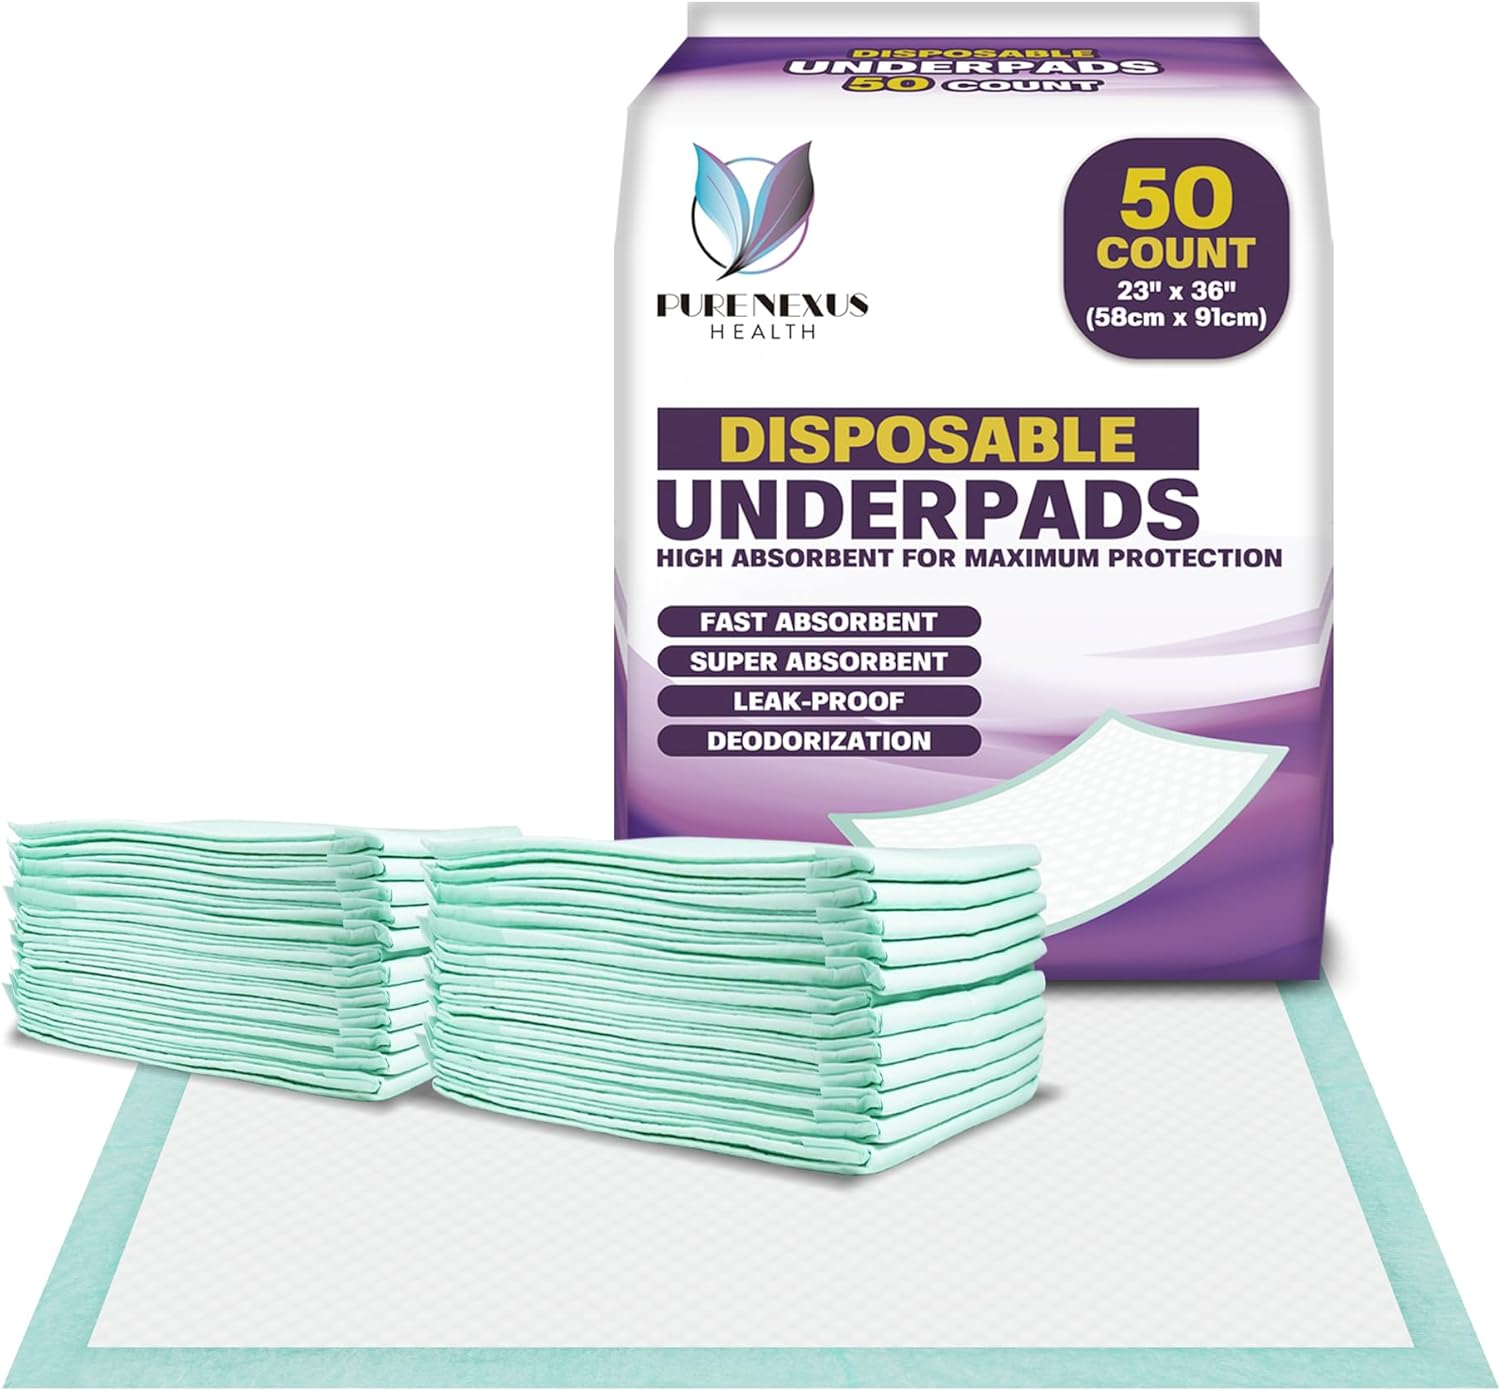 Disposable Underpads 23″ x 36″ (50-Count) Incontinence Pads, Chux, Bed Covers, Puppy Training Pads, Pee Pads for Babies, Kids, Adults